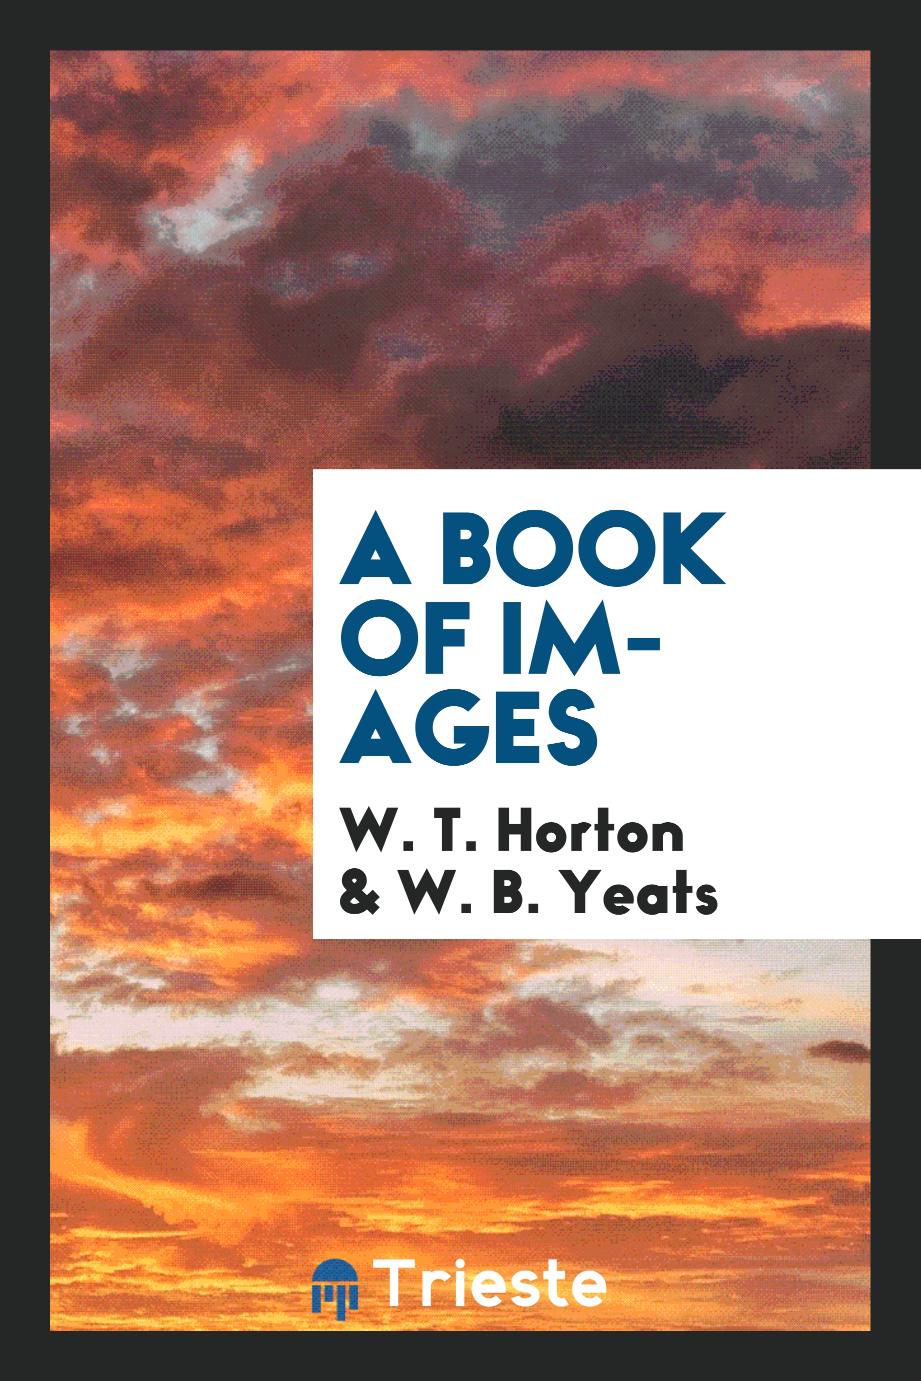 A book of images